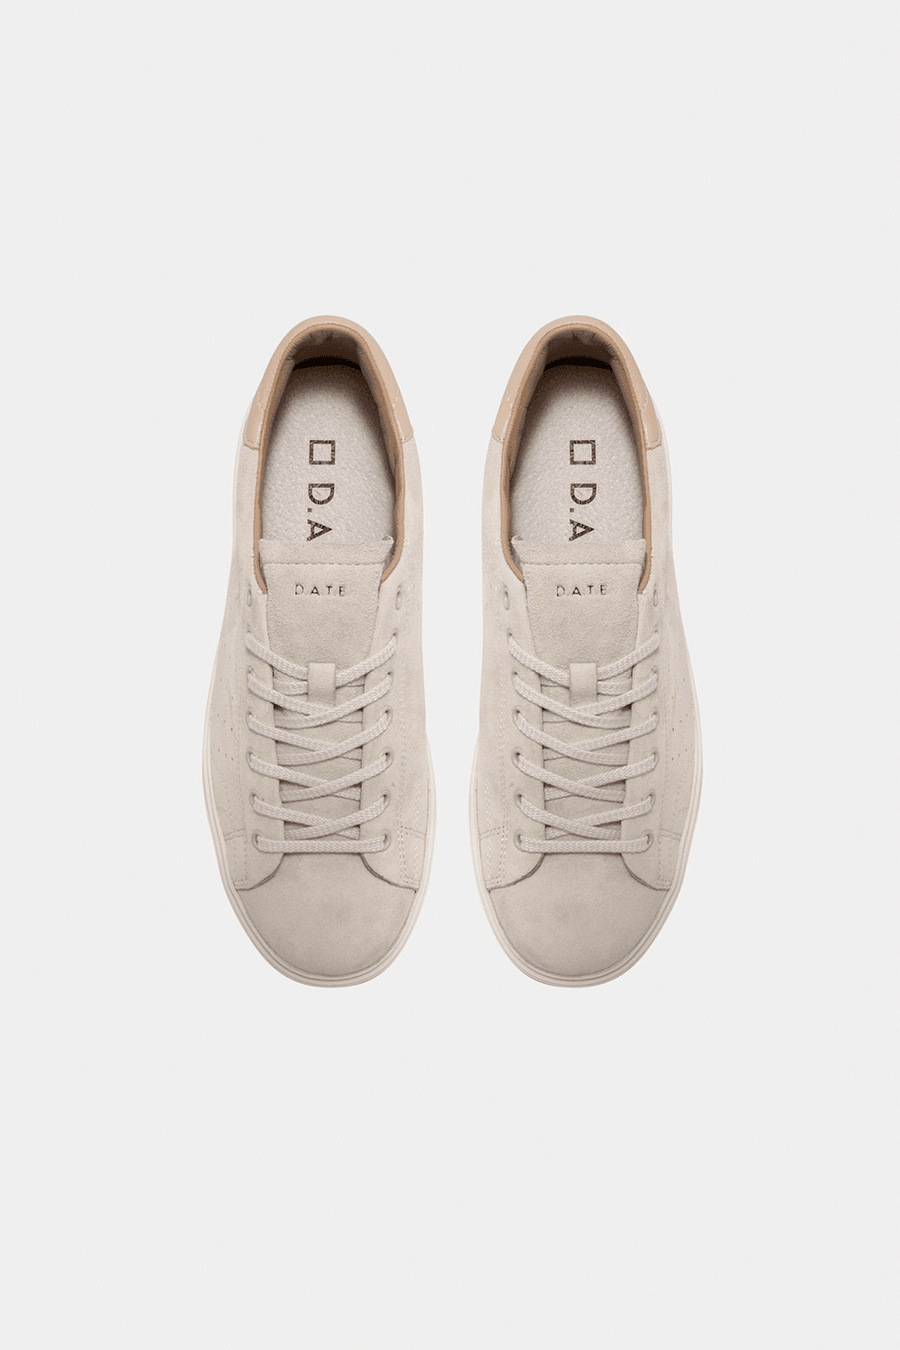 Buy the D.A.T.E. Levante River Sneaker in Beige at Intro. Spend £50 for free UK delivery. Official stockists. We ship worldwide.